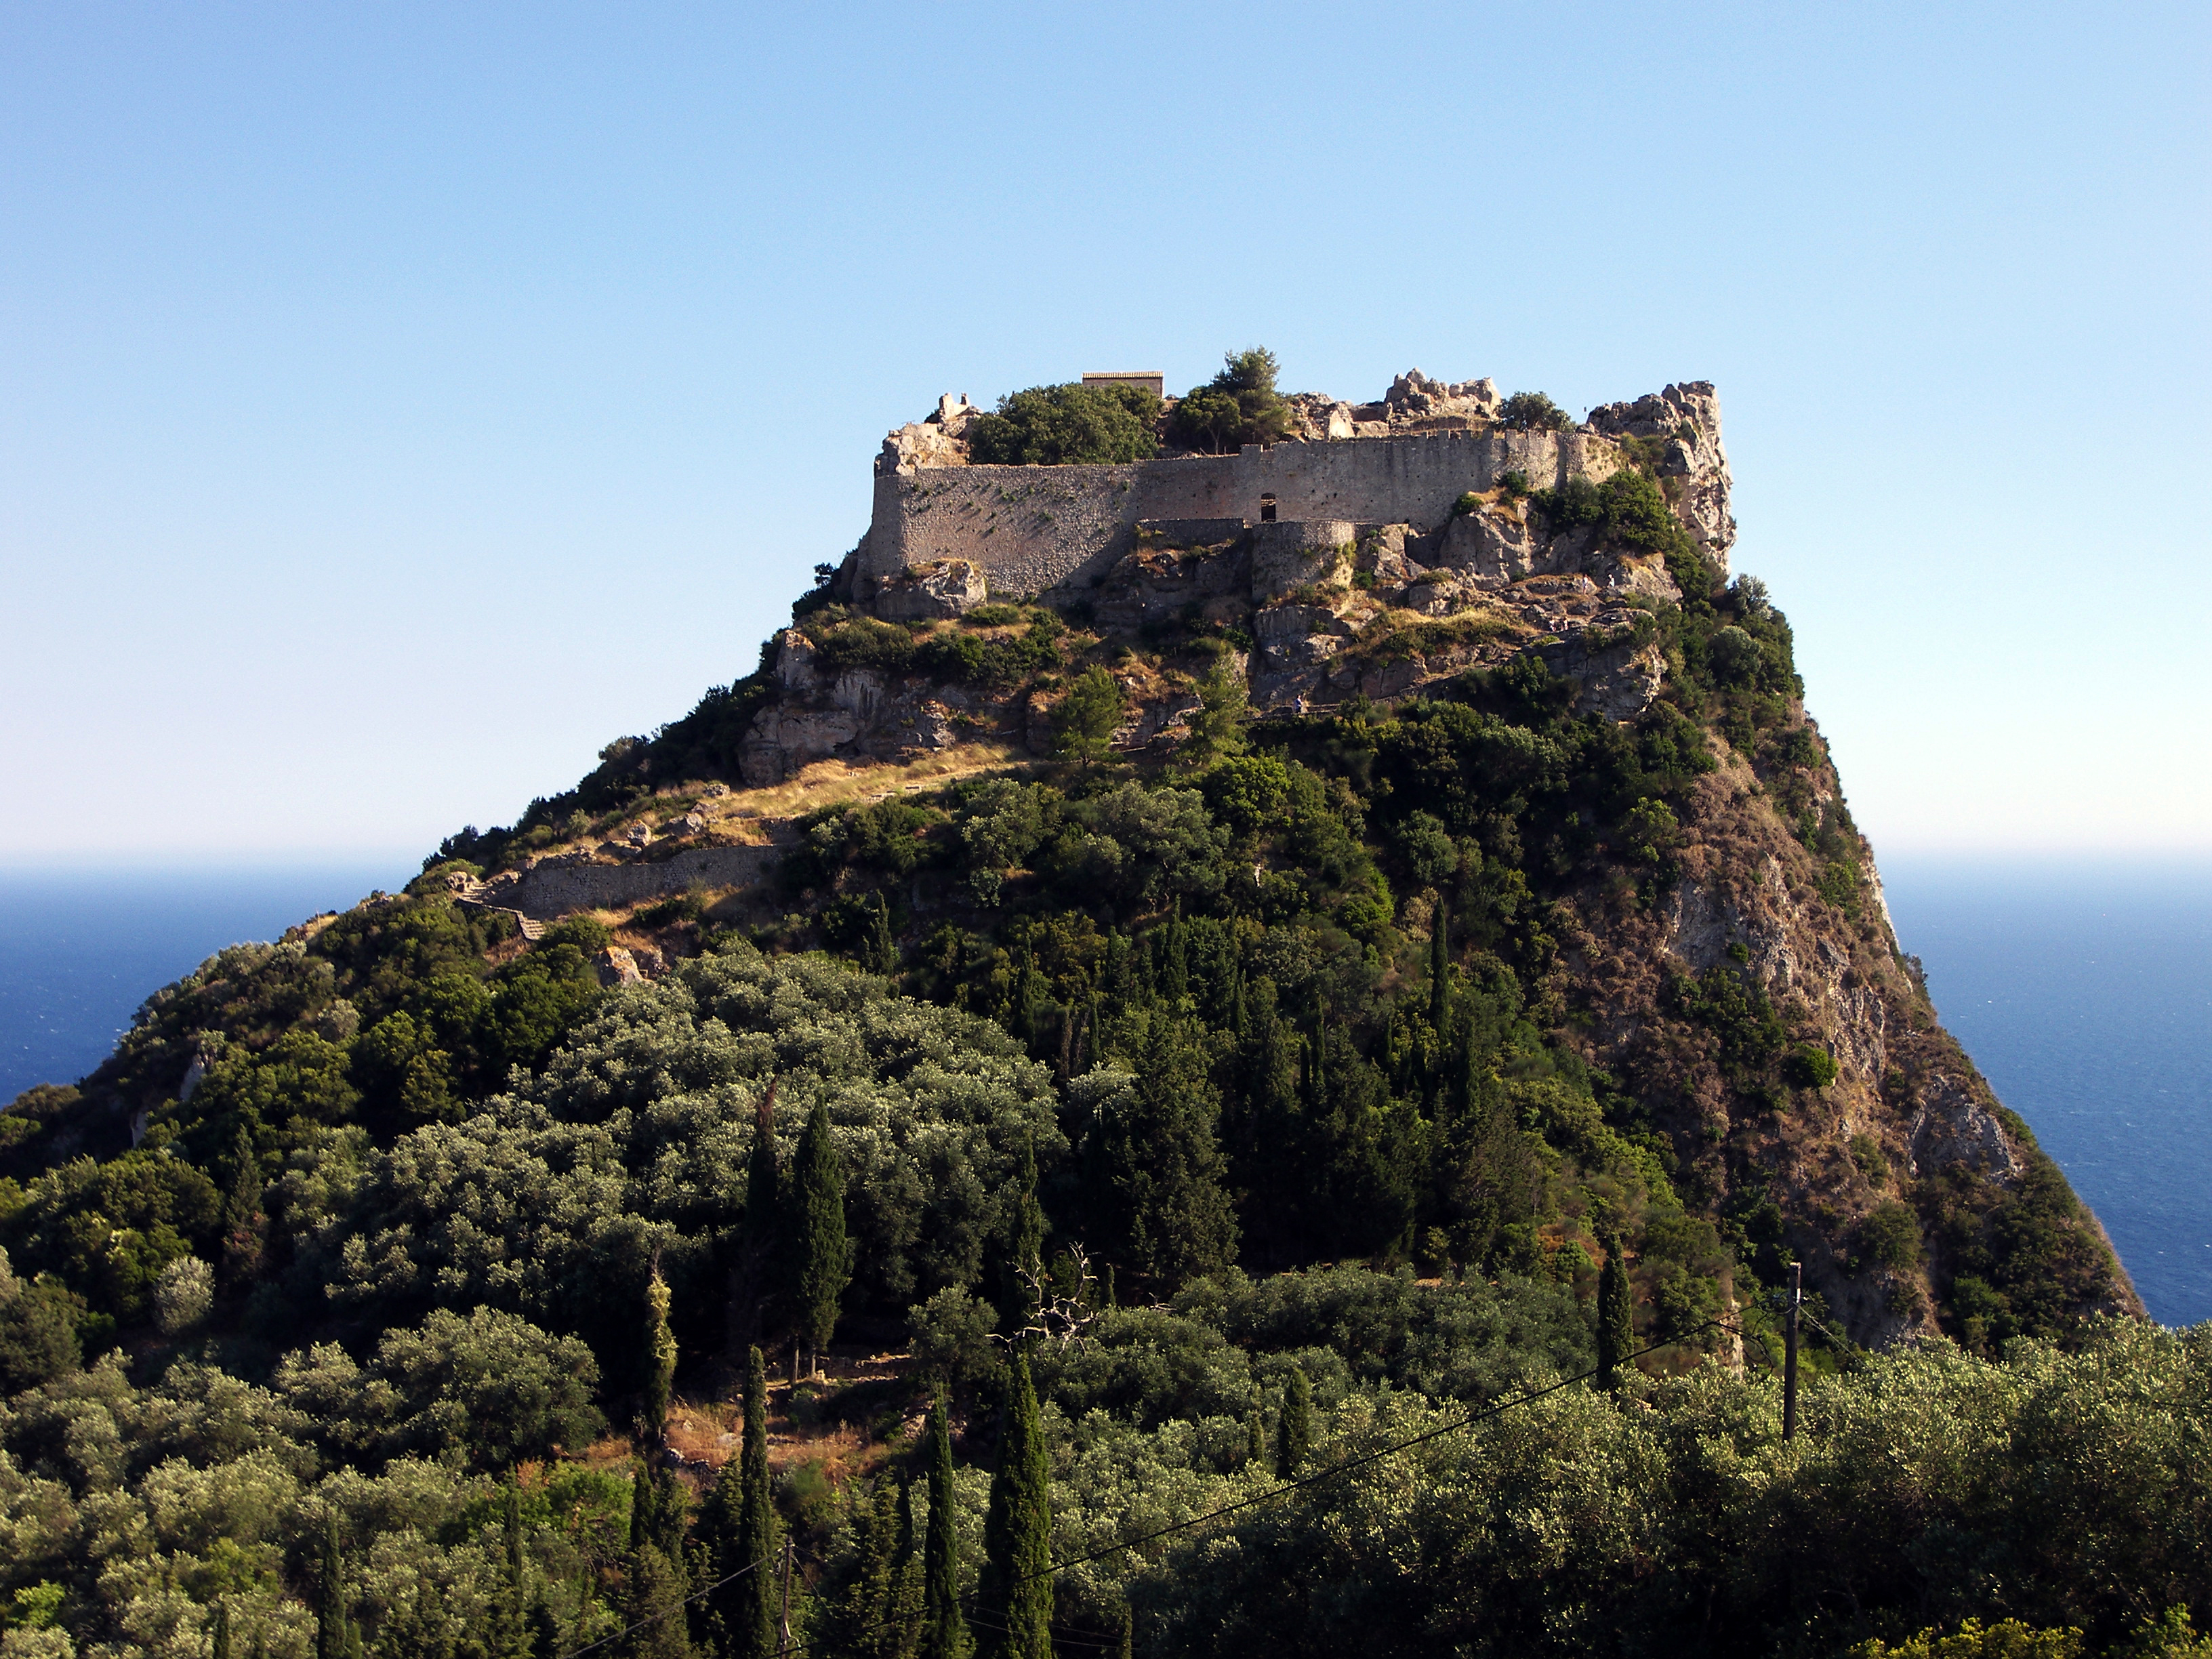 Angelokastro is a 13th-century hilltop fortress with breath-taking views near Paleokastritsa on the Greek island of Corfu in the Ionian Islands.